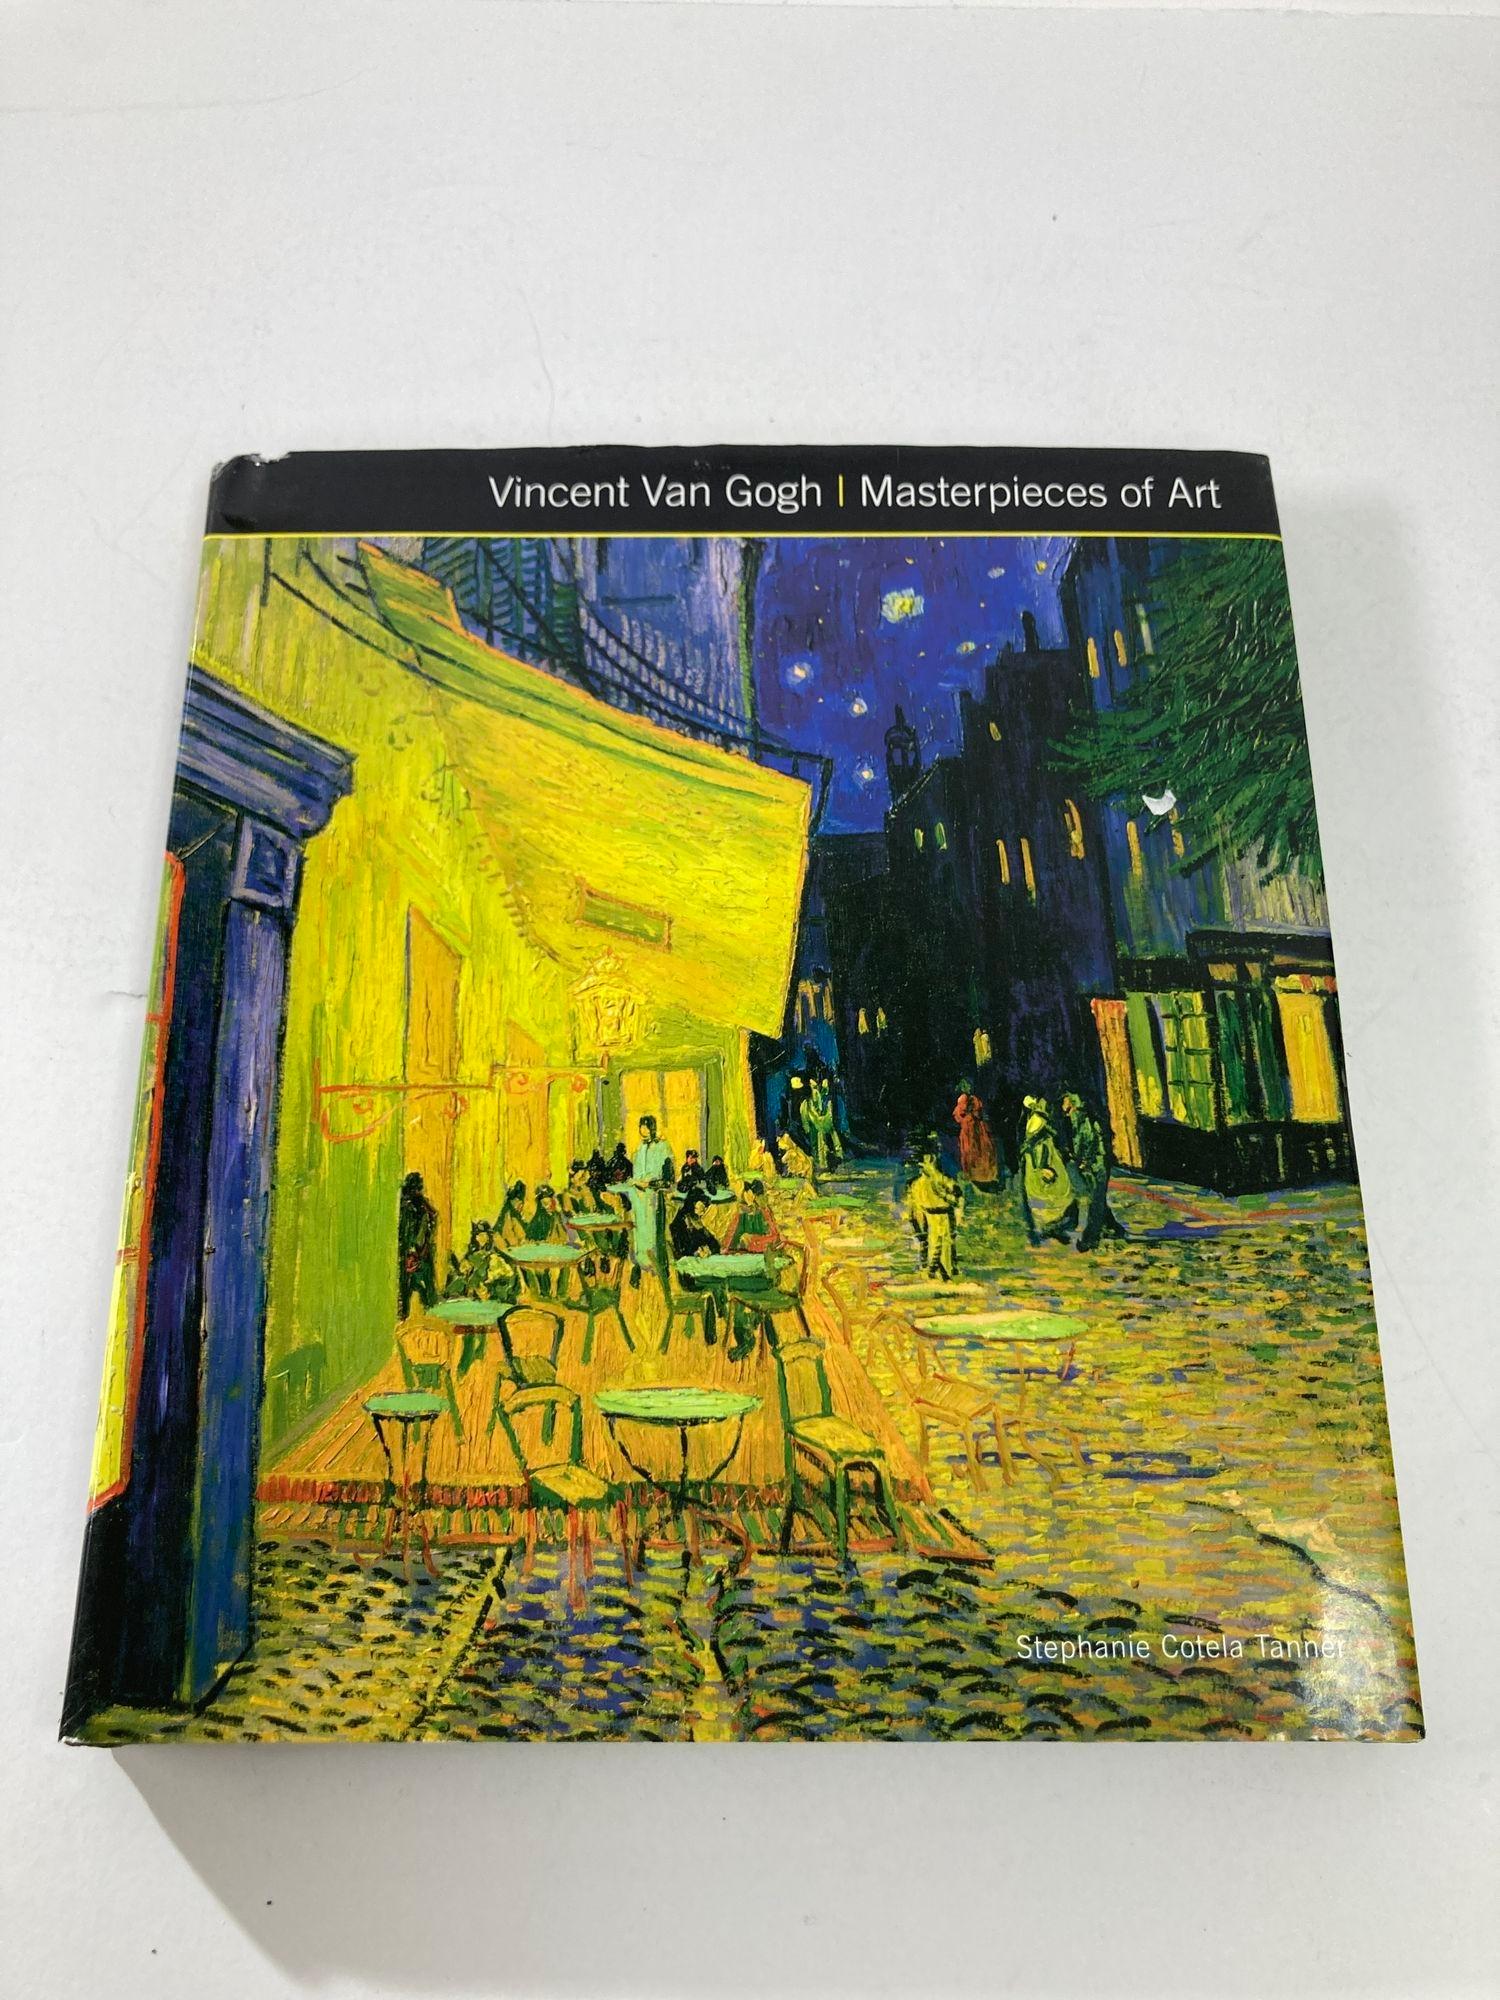 Vincent Van Gogh Masterpieces of Art by Stephanie Cotela Tanner.
Hardcover Art Book
Page count:128
Published:June 12, 2014
Contributor:Susie Hodge
Format:Hardcover
Publisher:Flame Tree Publishing
Language:English
Author:Stephanie Cotela